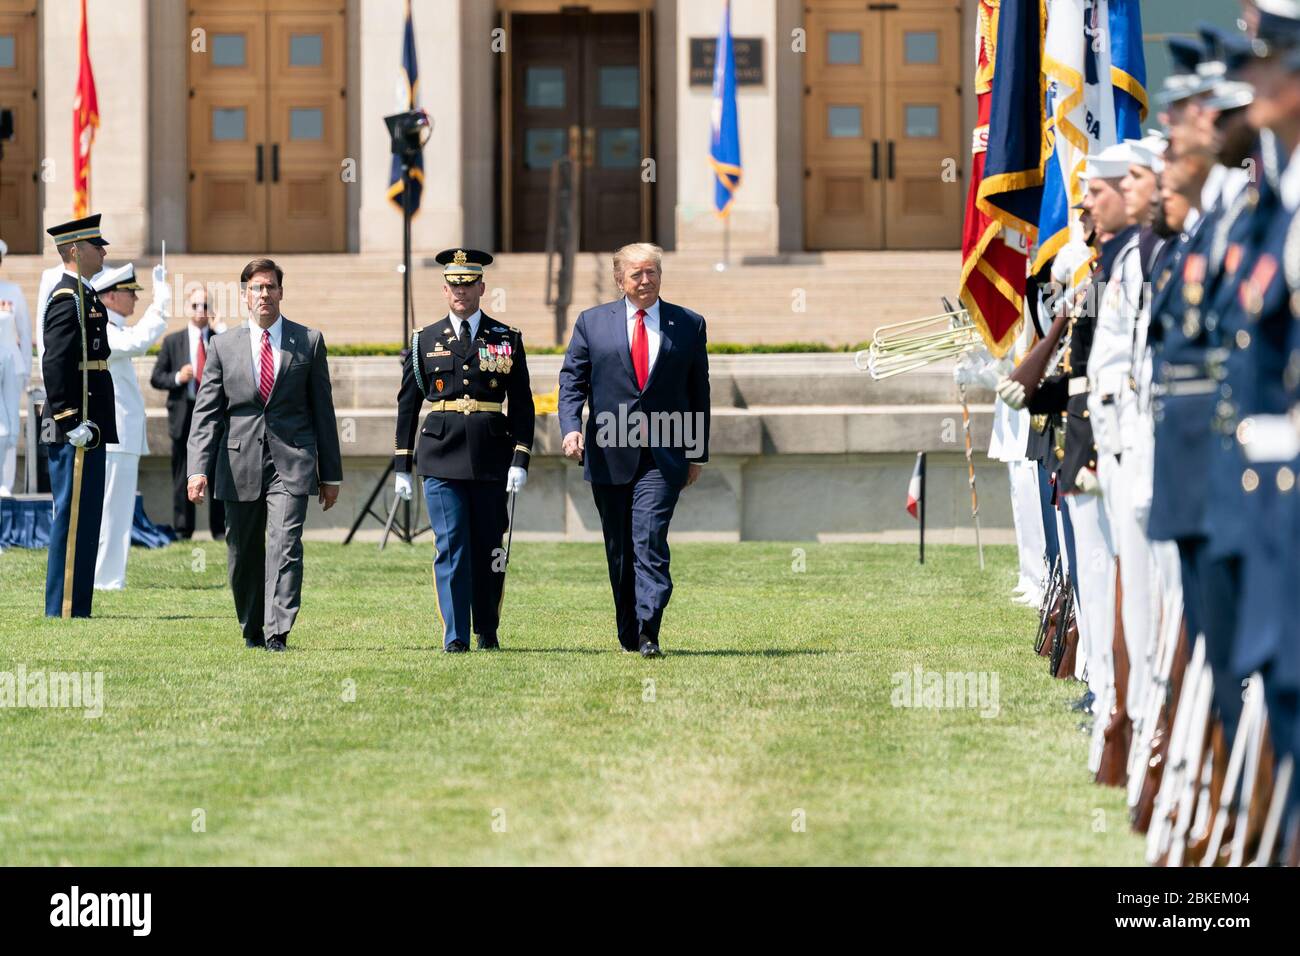 President Donald J. Trump reviews troops as he attends the Full Honors Ceremony for Secretary of Defense Esper Thursday, July 25, 2019, at the Pentagon in Arlington, Va. Full Honors Ceremony for Secretary of Defense Mark Esper Stock Photo